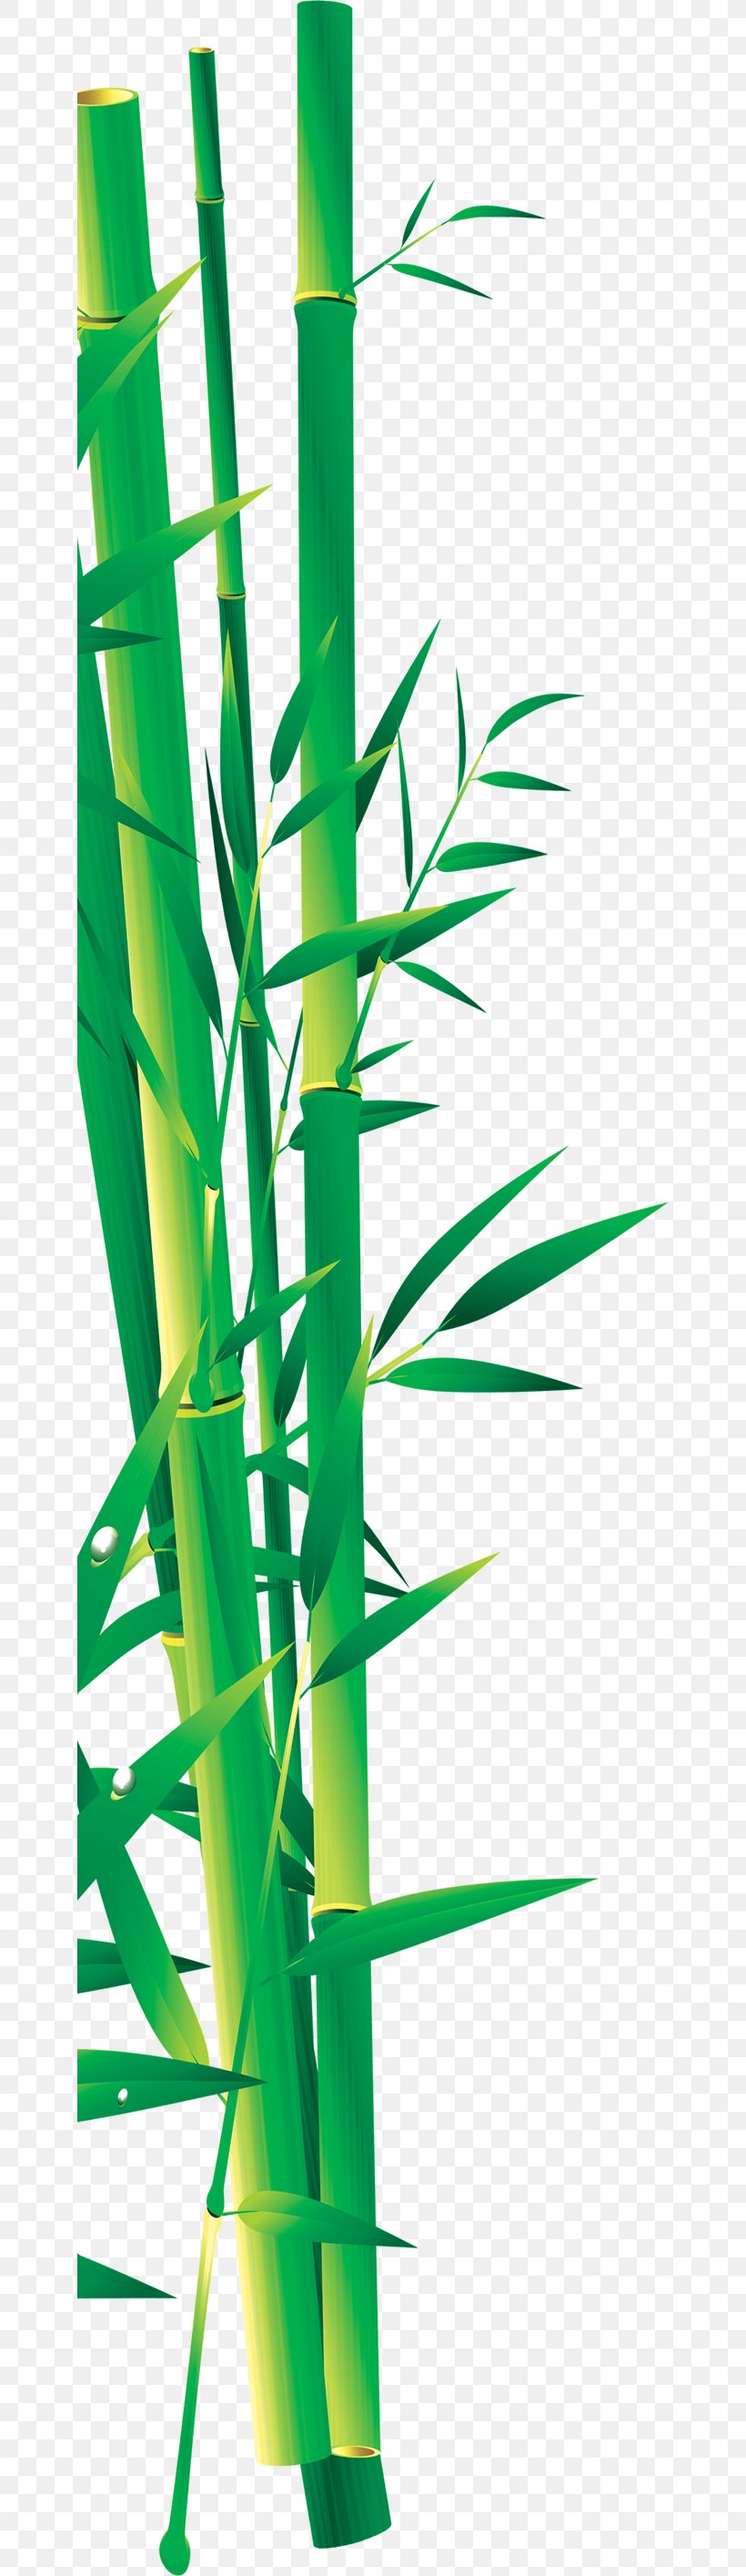 Bamboo Bamboe Icon, PNG, 650x2830px, Bamboo, Bamboe, Grass, Gratis, Green Download Free